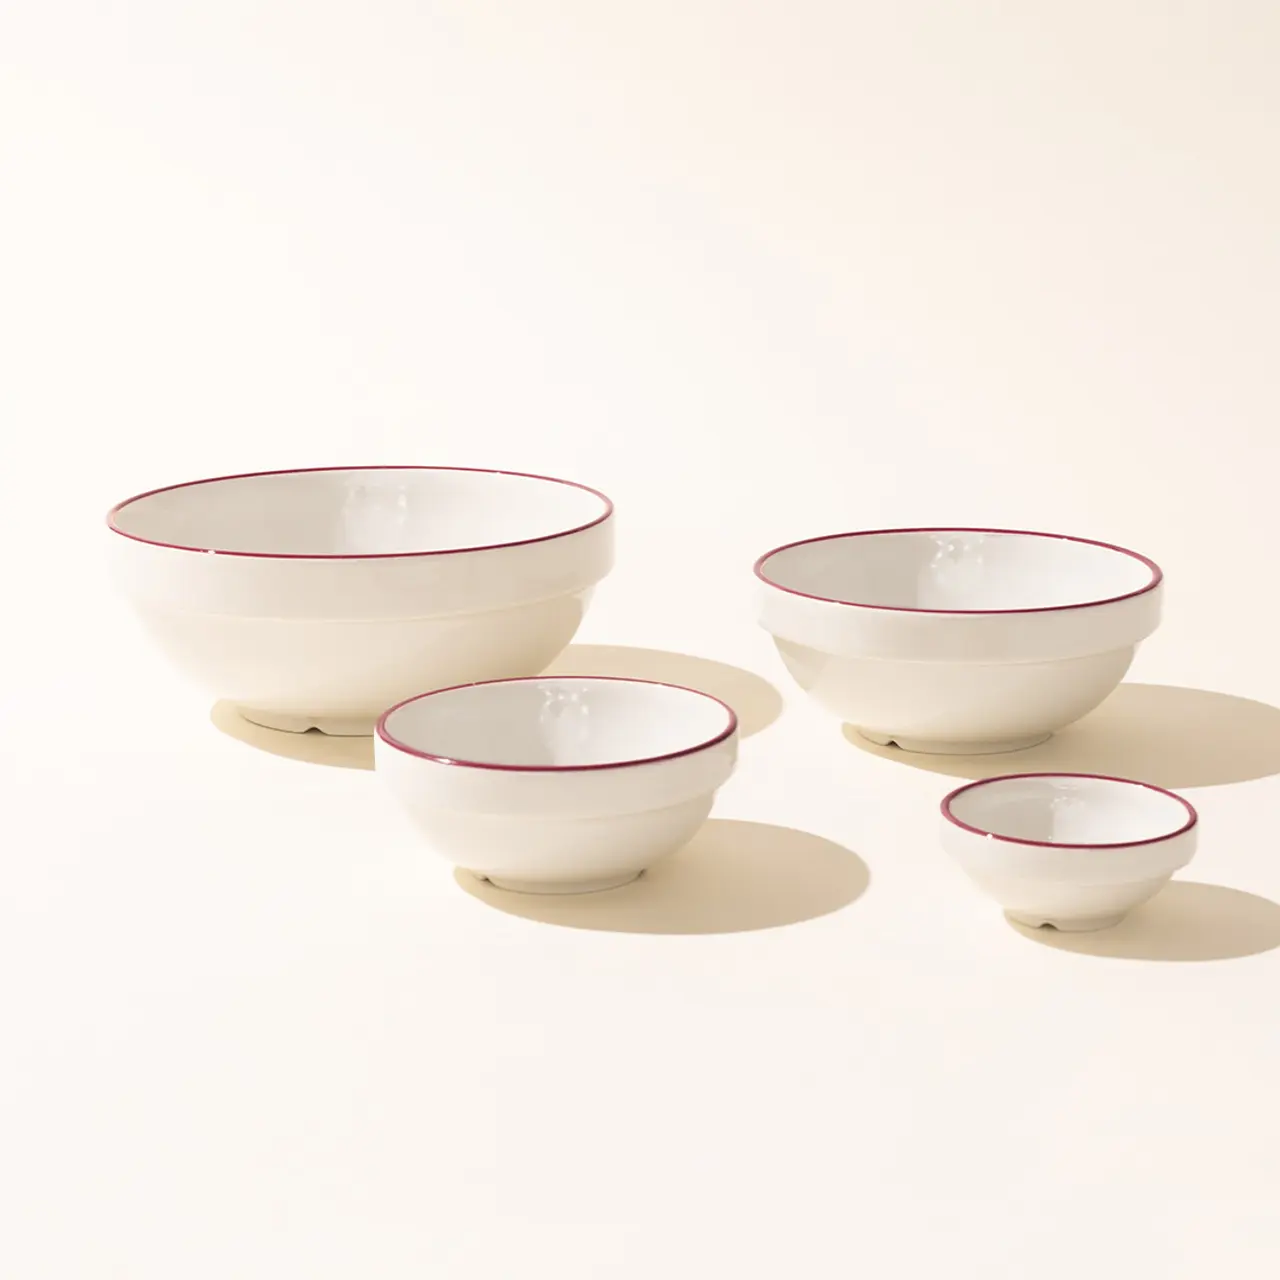 Four progressively smaller white bowls with red rims are arranged in a descending line against a beige background.